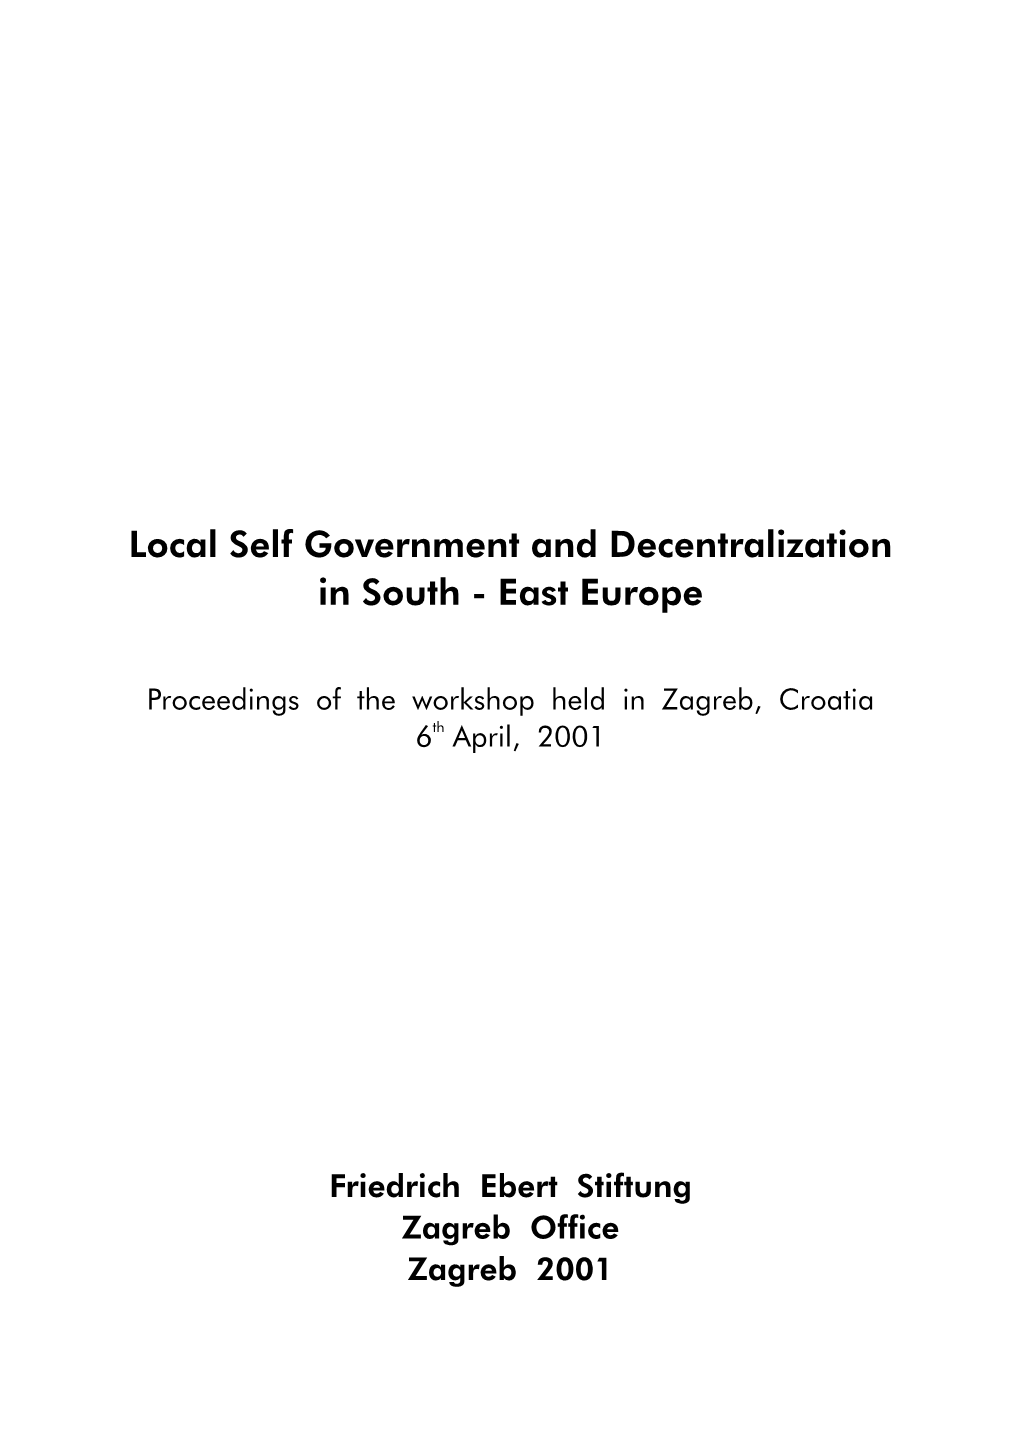 Local Self Government and Decentralization in South - East Europe